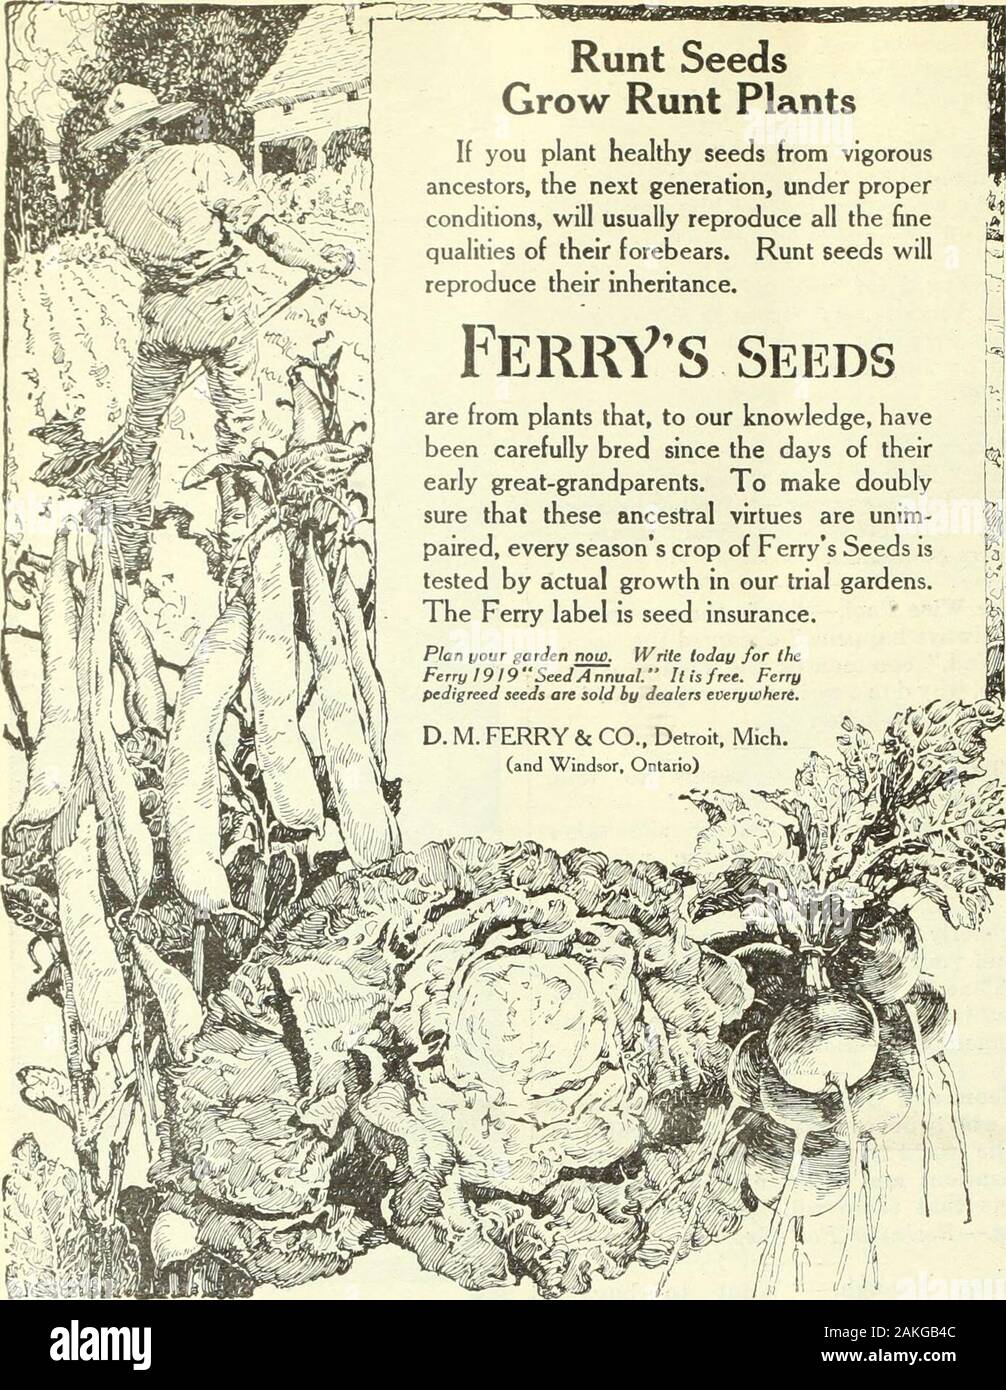 The literary digest . 72 The Literary Digest for January 25, 1919 Runt SeedsGrow Runt Plants If you plant healthy seeds hom vigorousancestors, the next generation, under properconditions, will usually reproduce all the finequalities of their forebears. Runt seeds willreproduce their inheritance. FerrYS Seeds are from plants that, to our knowledge, havebeen carefully bred since the days of theirearly great-grandparents. To make doublysure that these ancestral virtues are unim-paired, every seasons crop of Ferrys Seeds istested by actual growth in our trial gardens.The Ferry label is seed insura Stock Photo